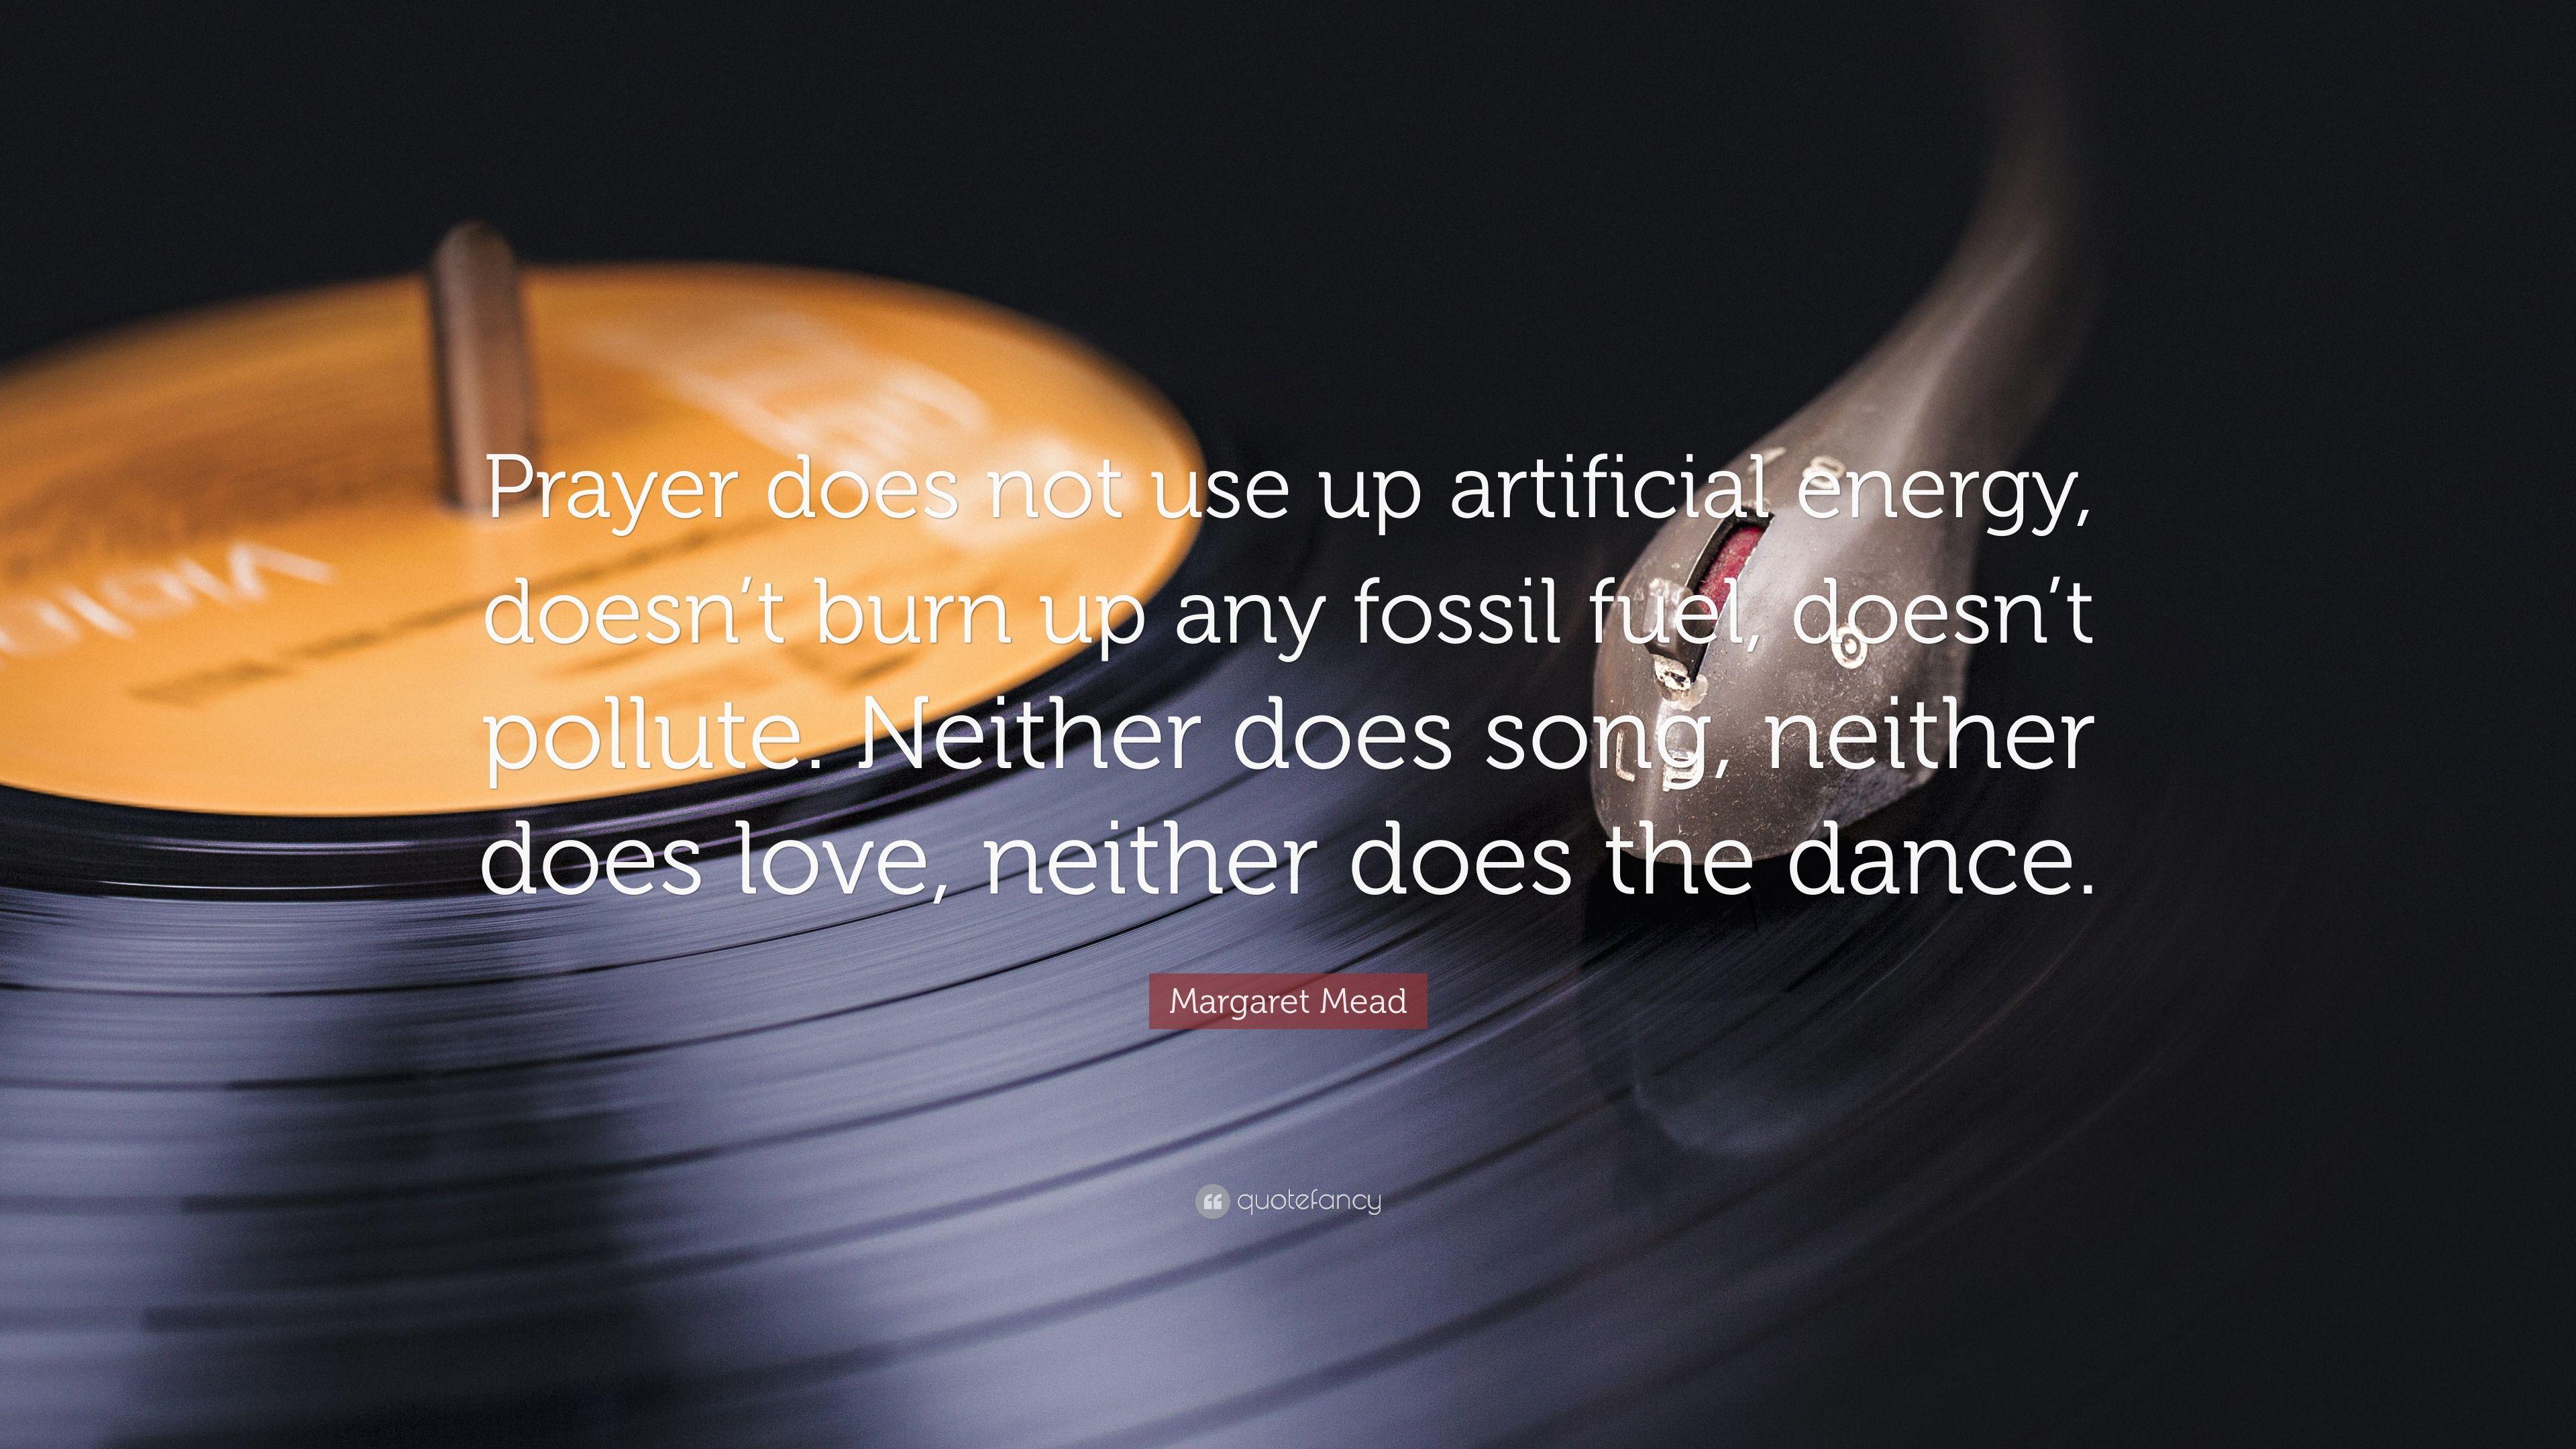 Margaret Mead Quote: “Prayer does not use up artificial energy